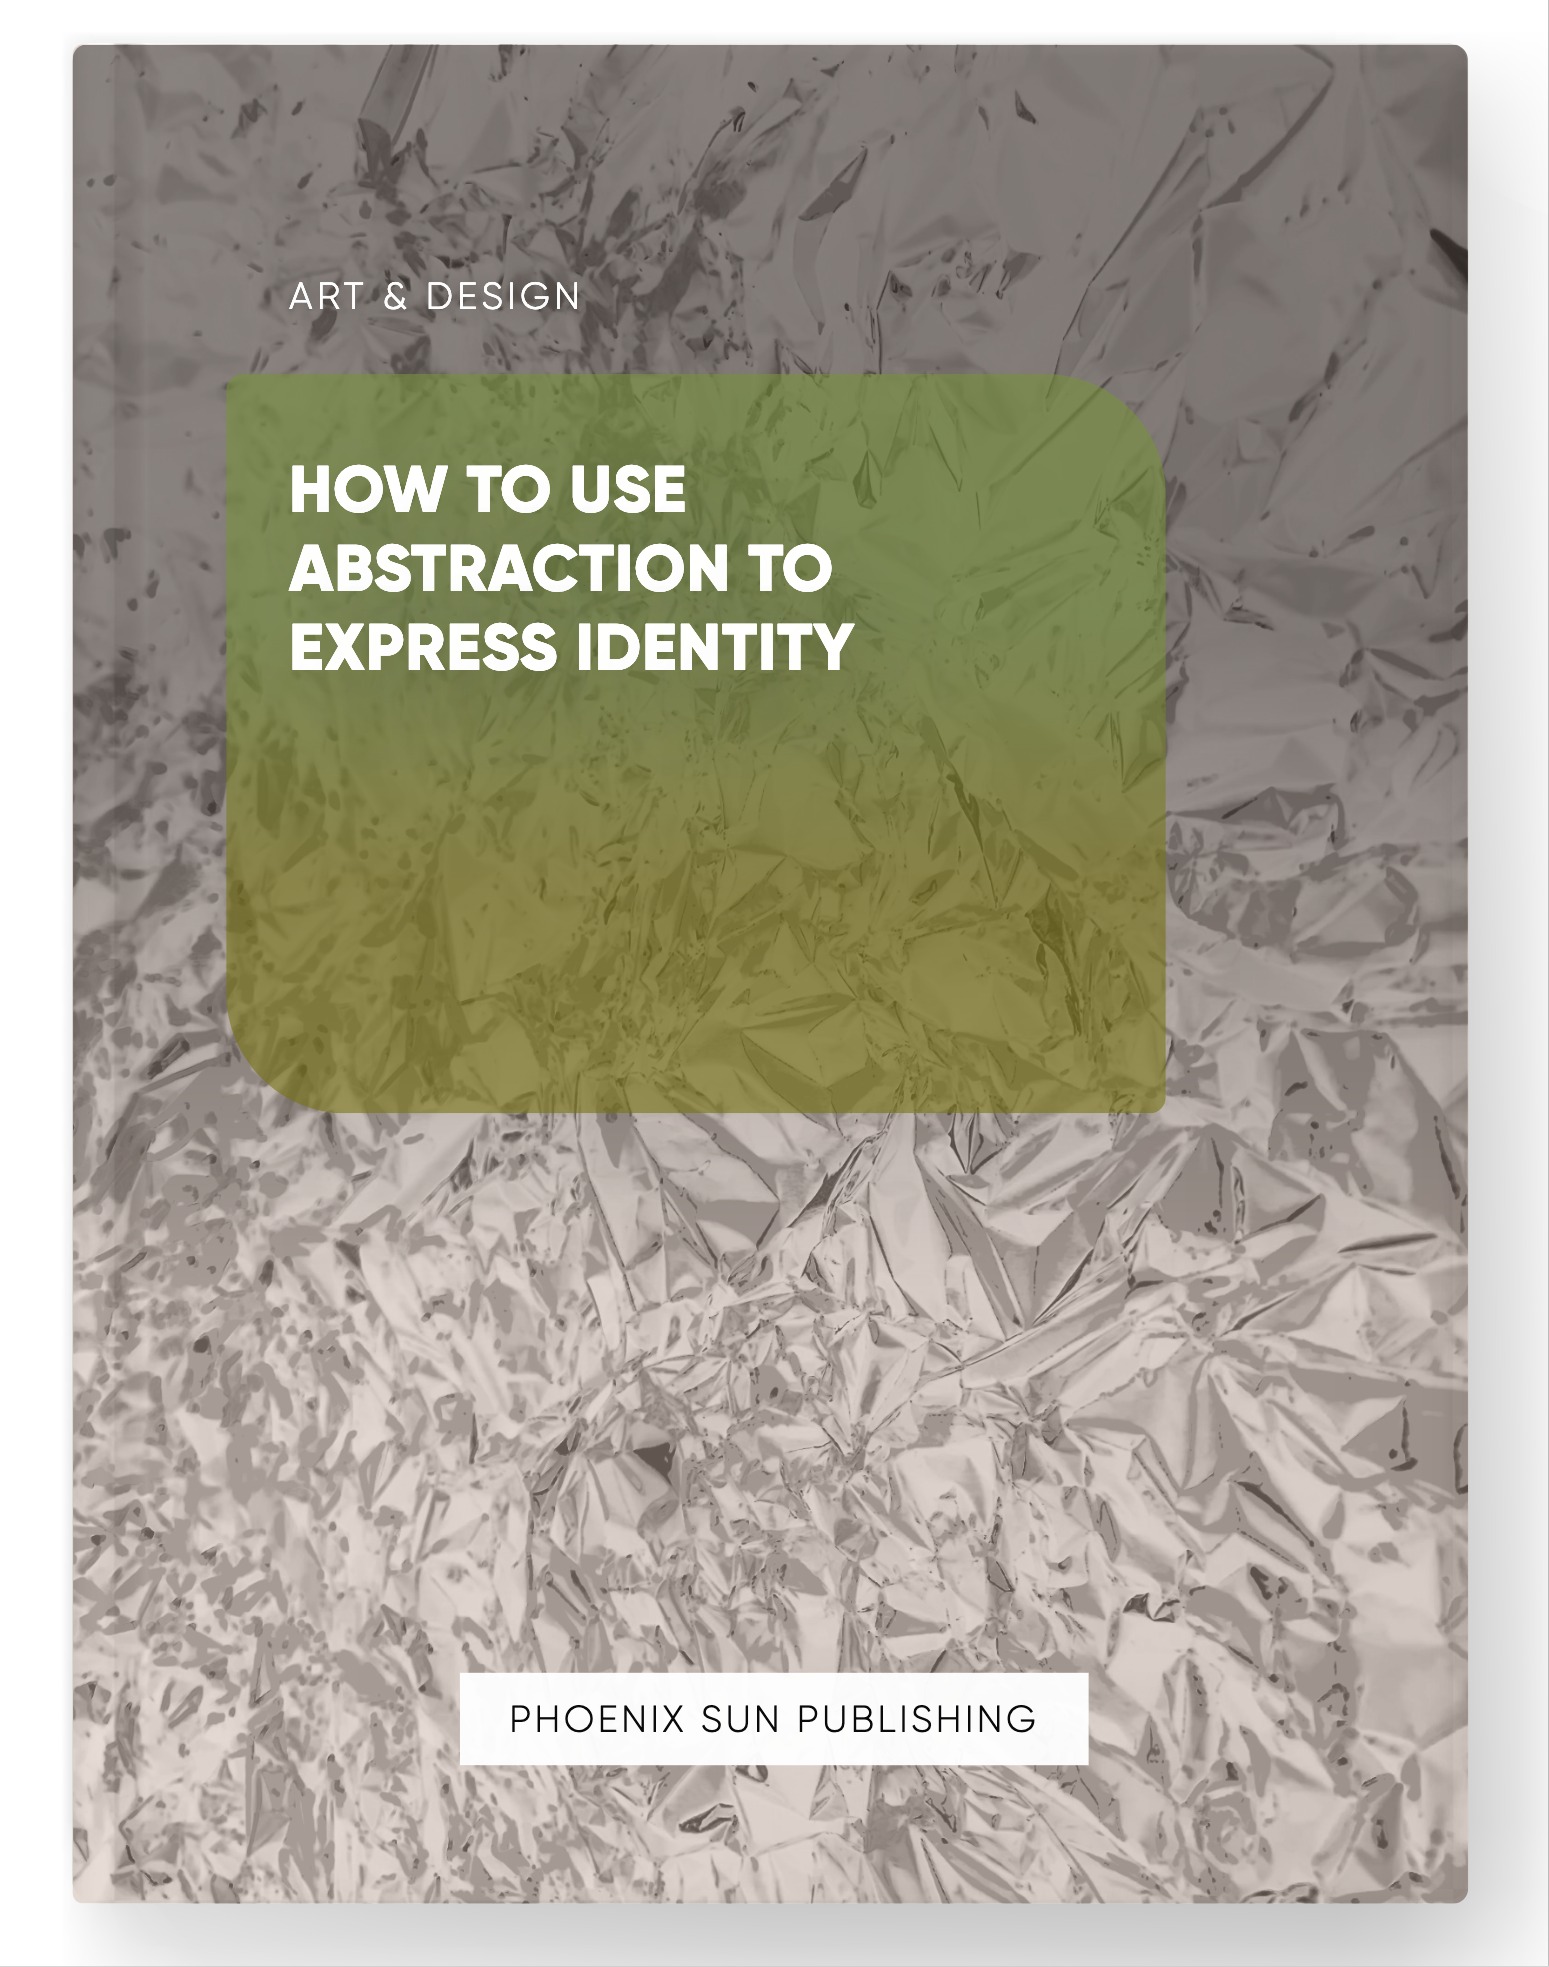 How to Use Abstraction to Express Identity